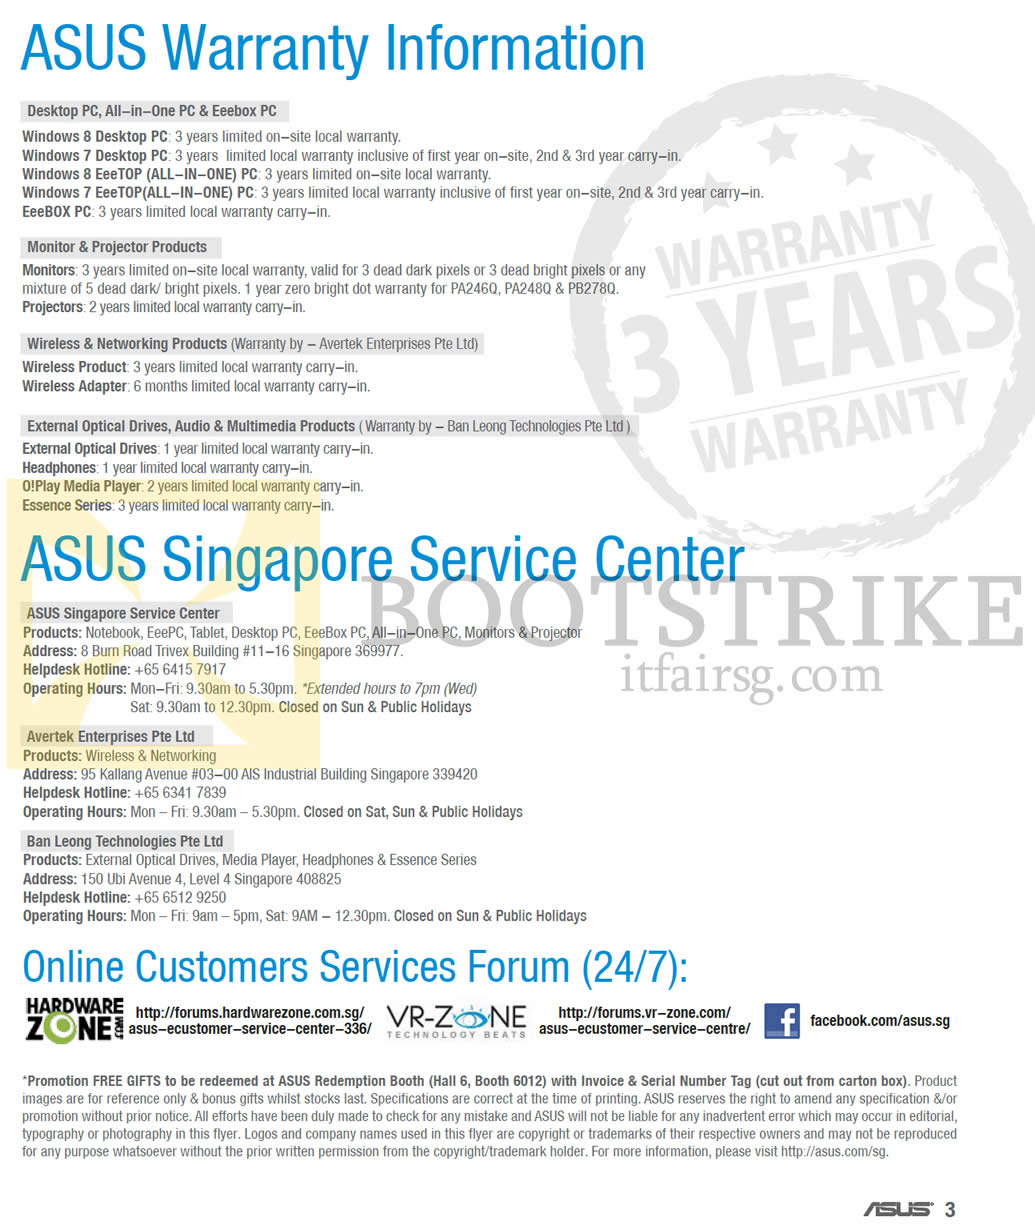 PC SHOW 2013 price list image brochure of ASUS Warranty Information, Service Centres